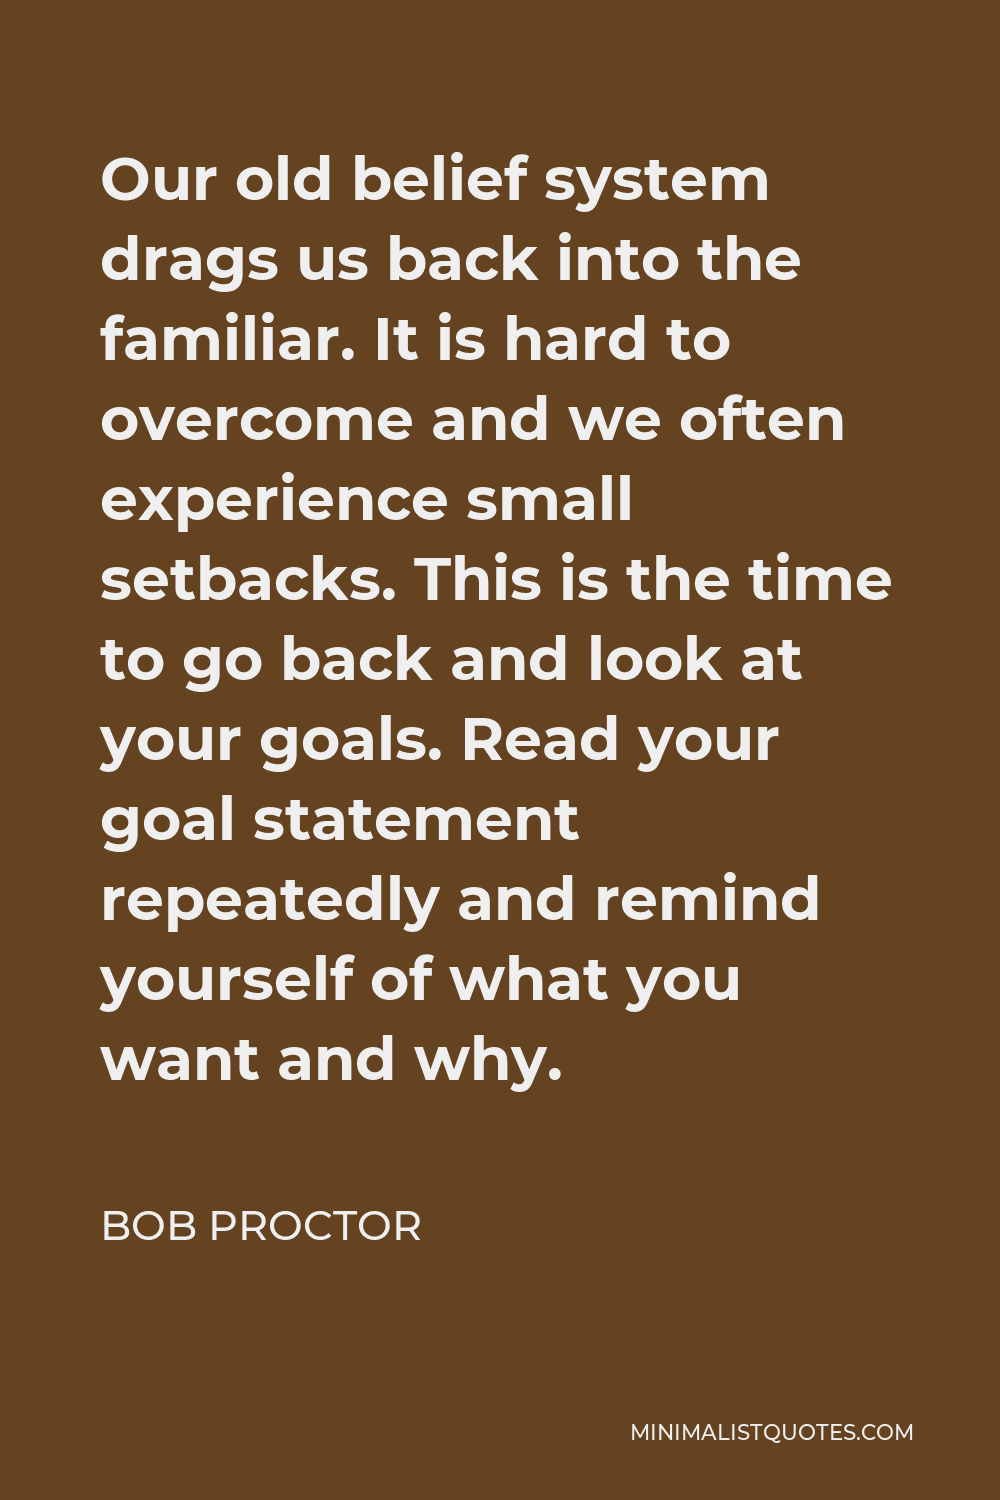 Bob Proctor Quote - Our old belief system drags us back into the familiar. It is hard to overcome and we often experience small setbacks. This is the time to go back and look at your goals. Read your goal statement repeatedly and remind yourself of what you want and why.